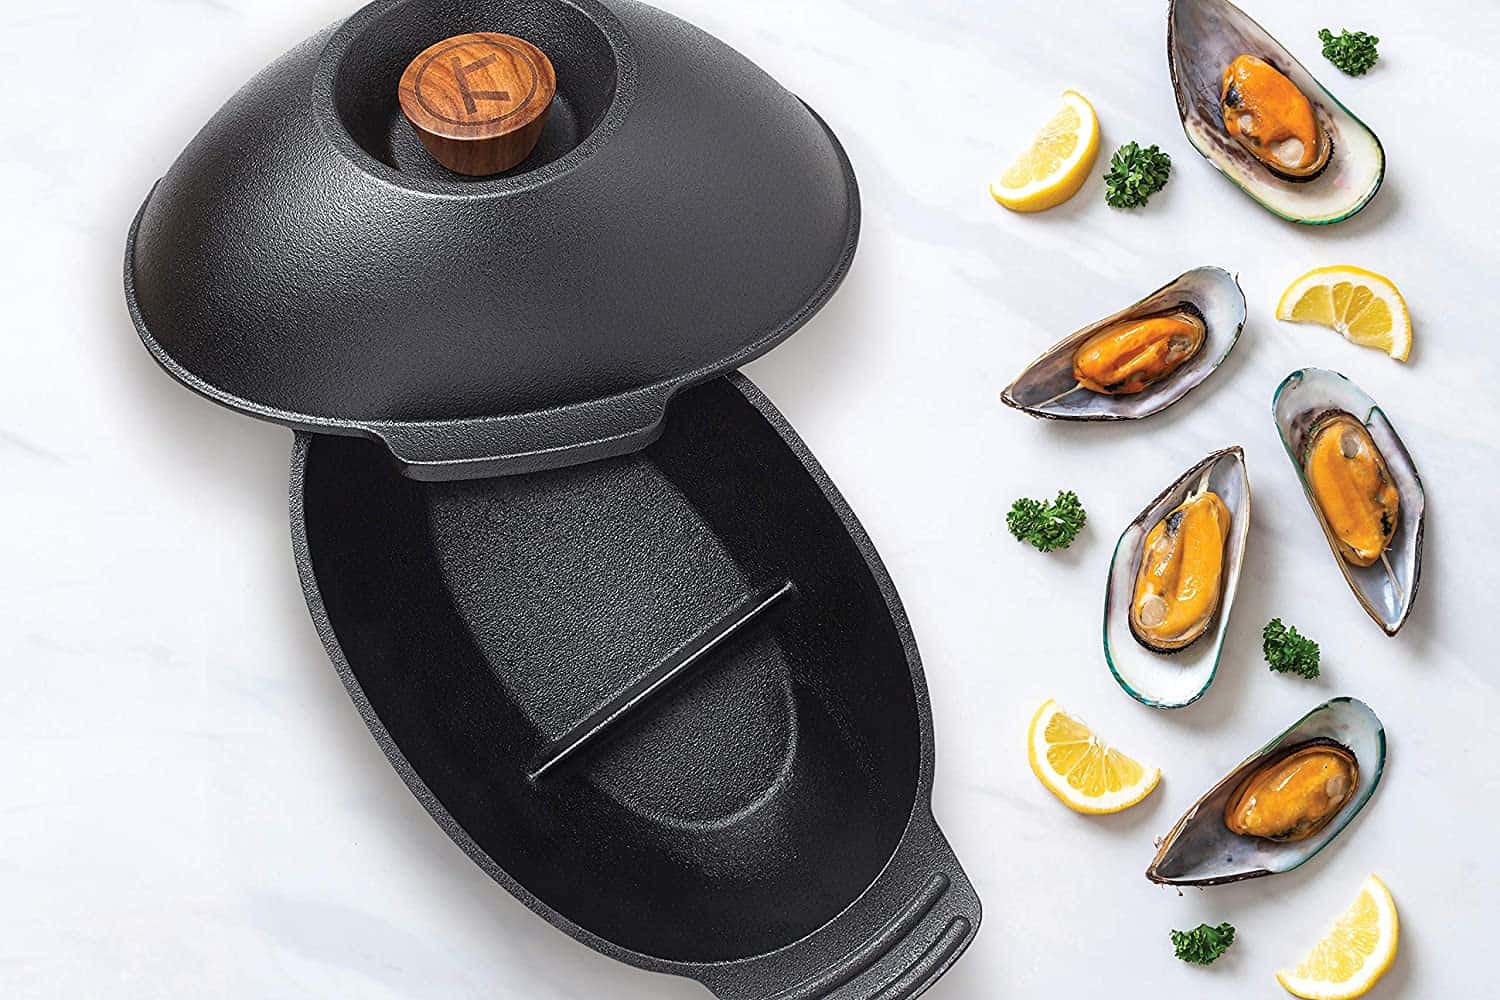 Best induction seafood and mussel pan- Outset 76495